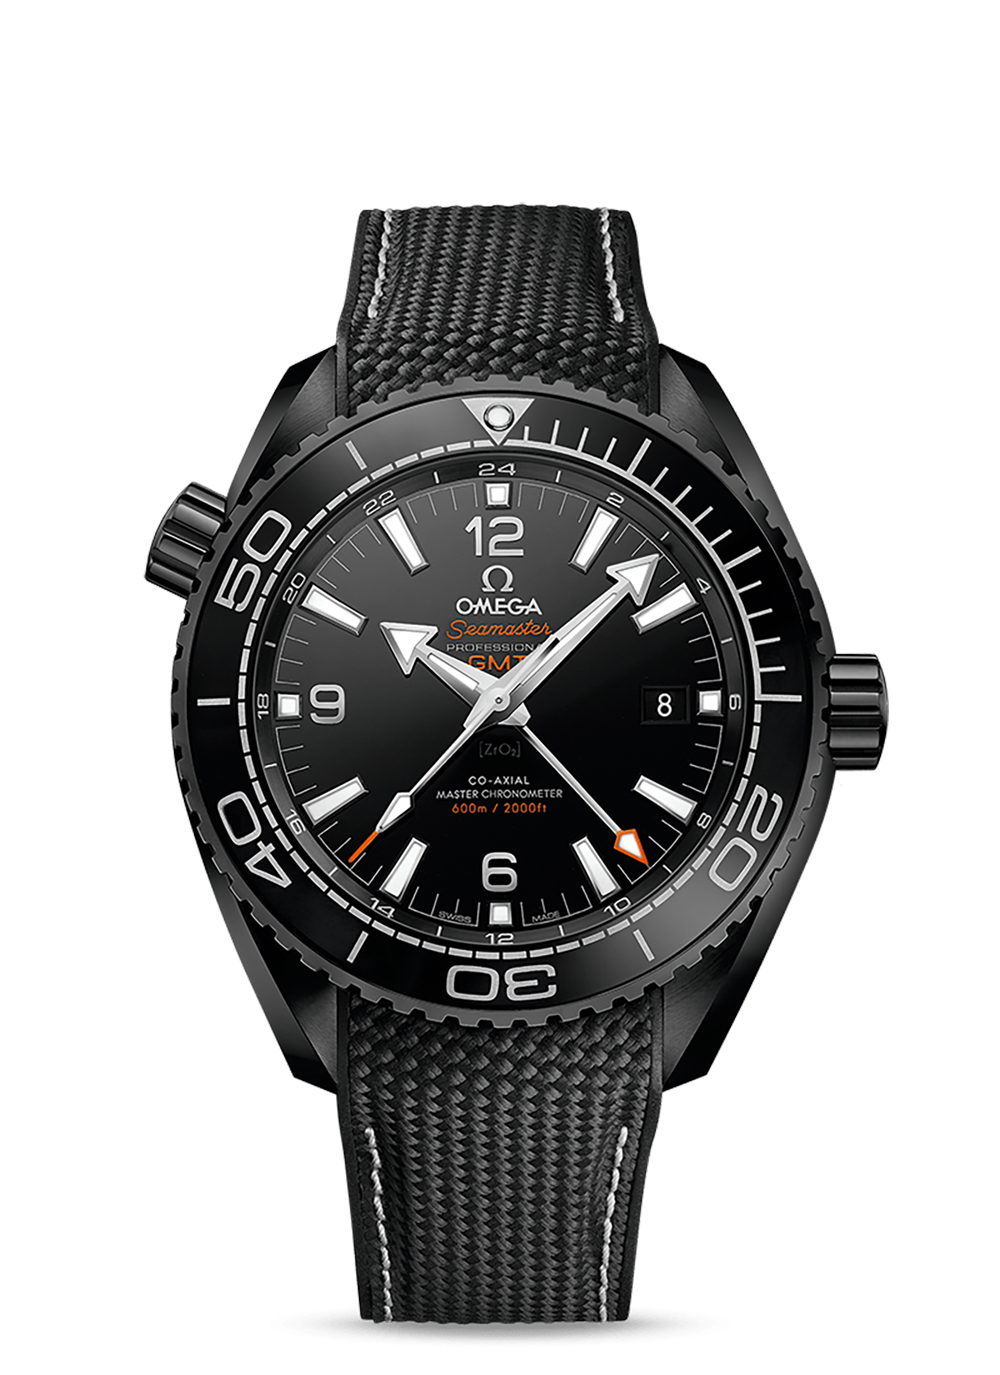 Planet Ocean 600M Co-axial Master Chronometer GMT 45.5 mm